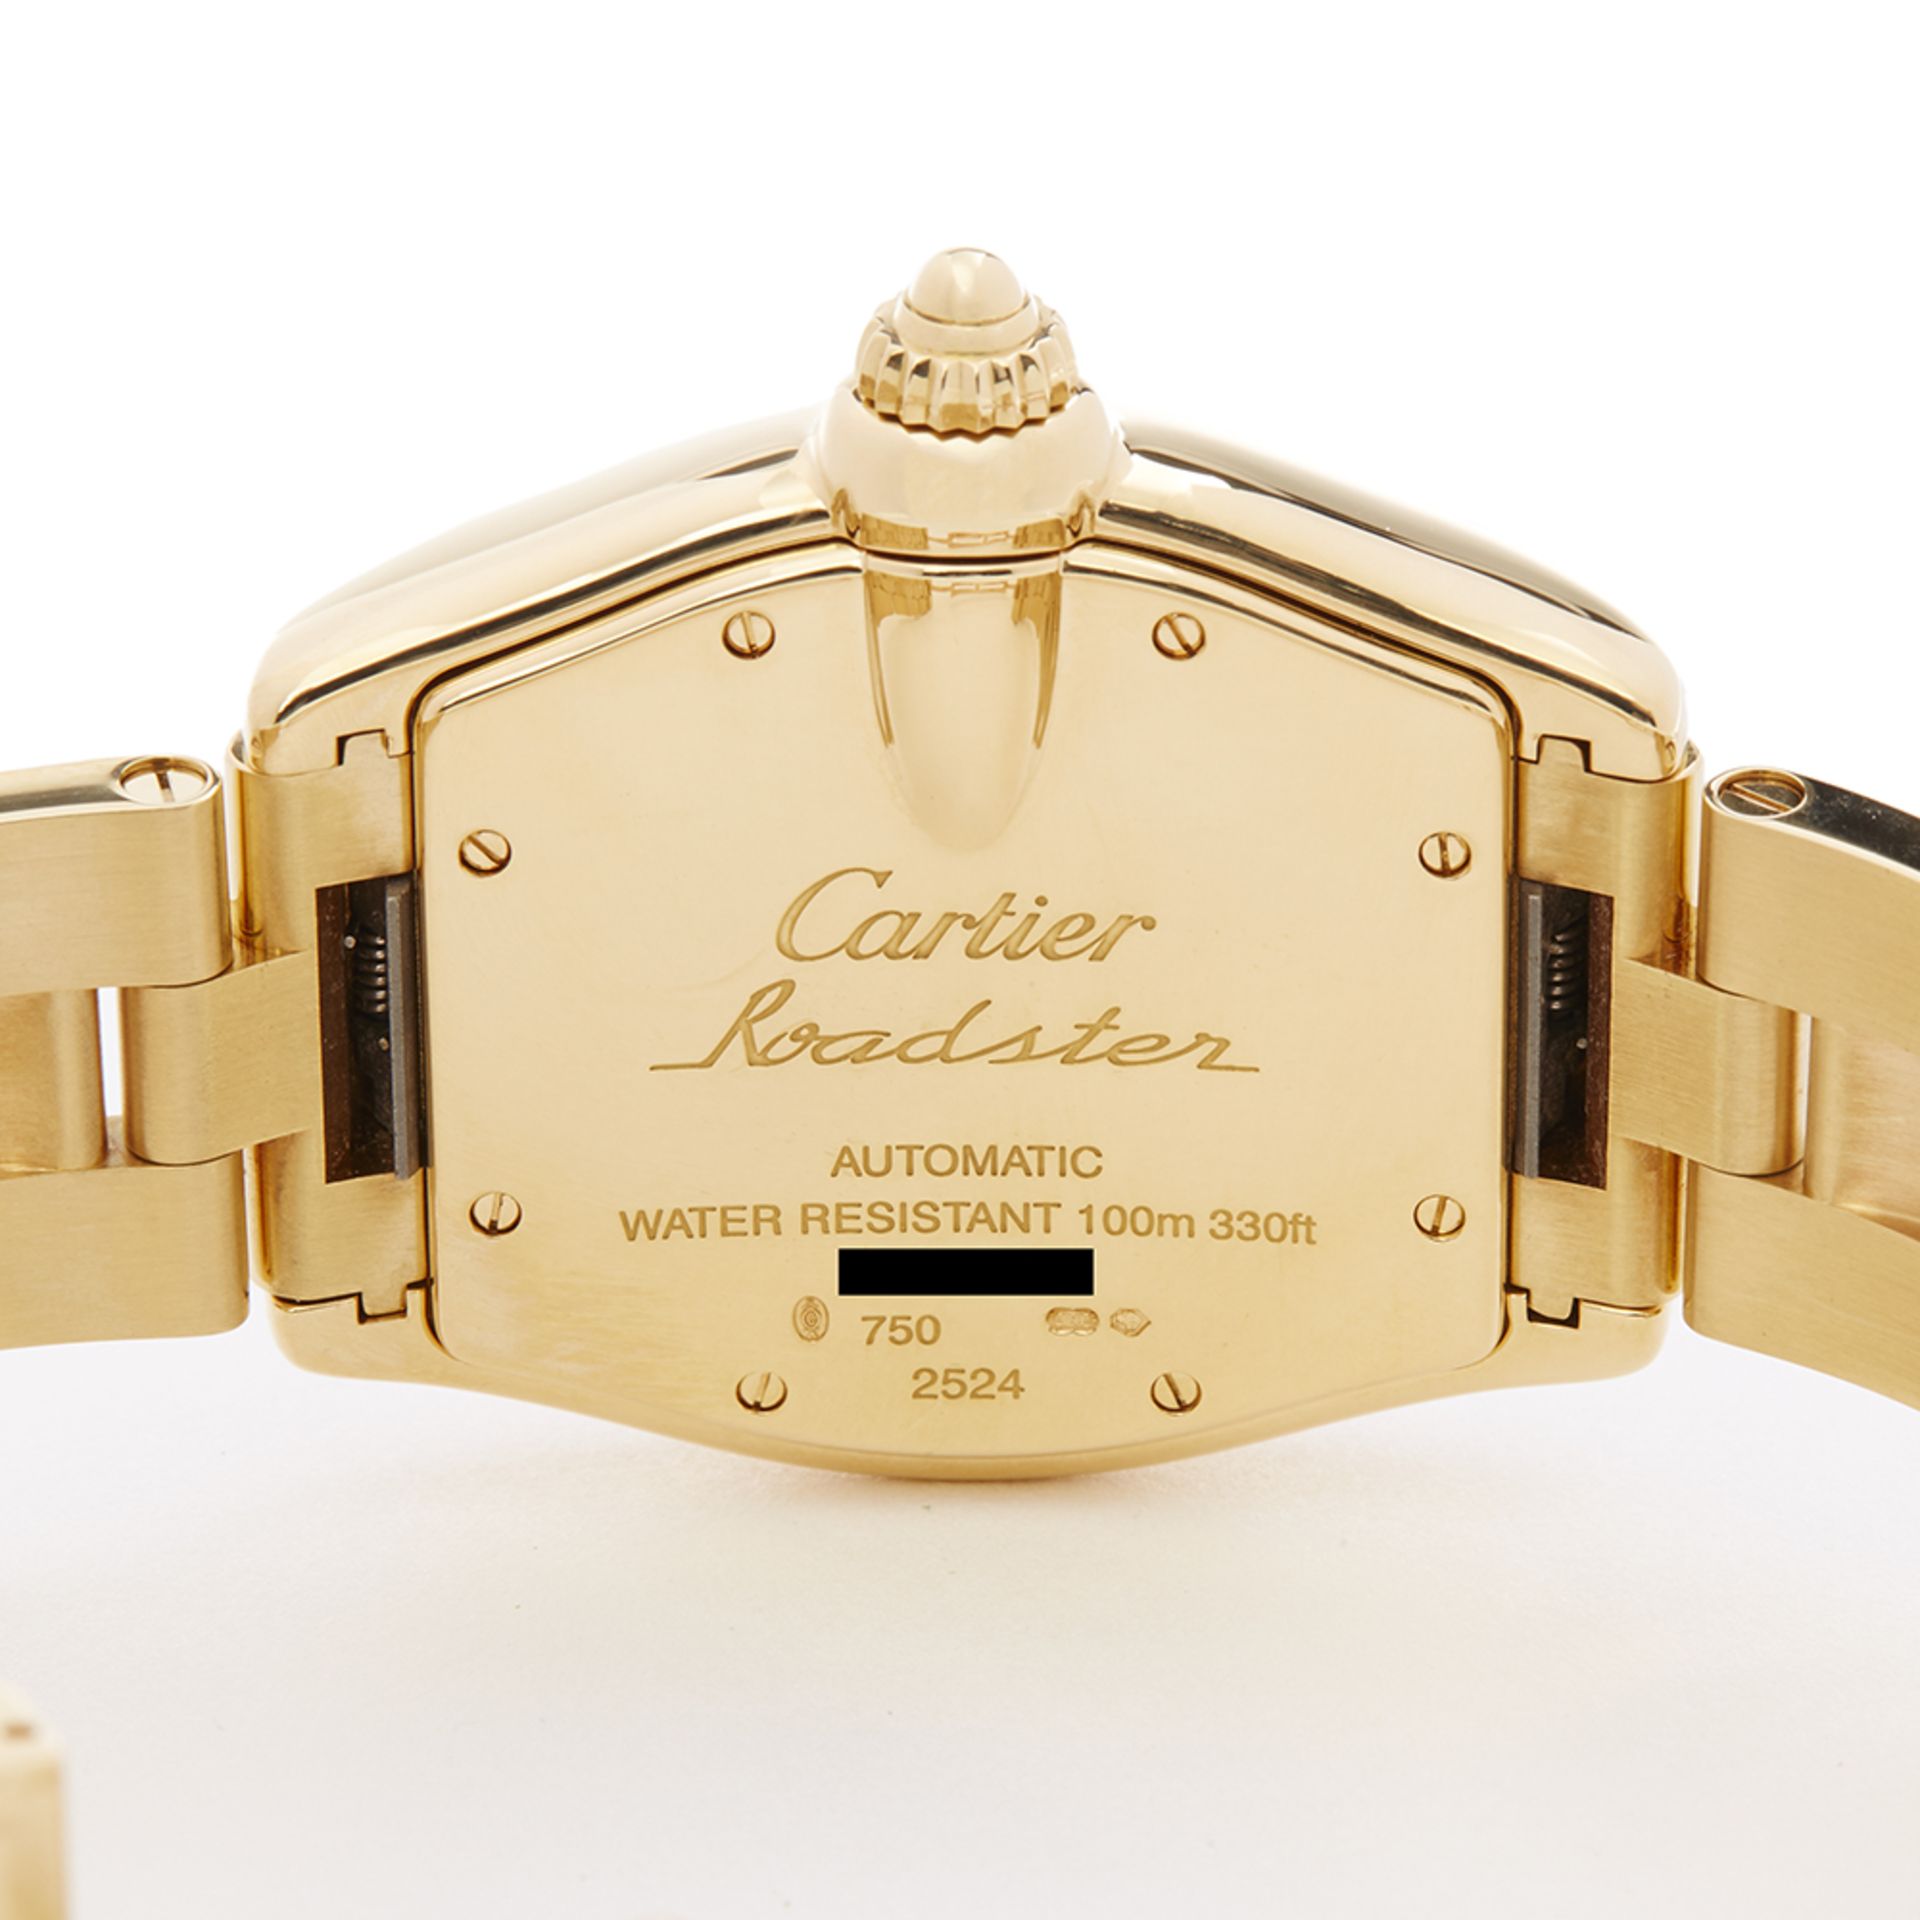 Cartier Roadster 18K Yellow Gold - 2524 or W620005V2 - Image 6 of 7